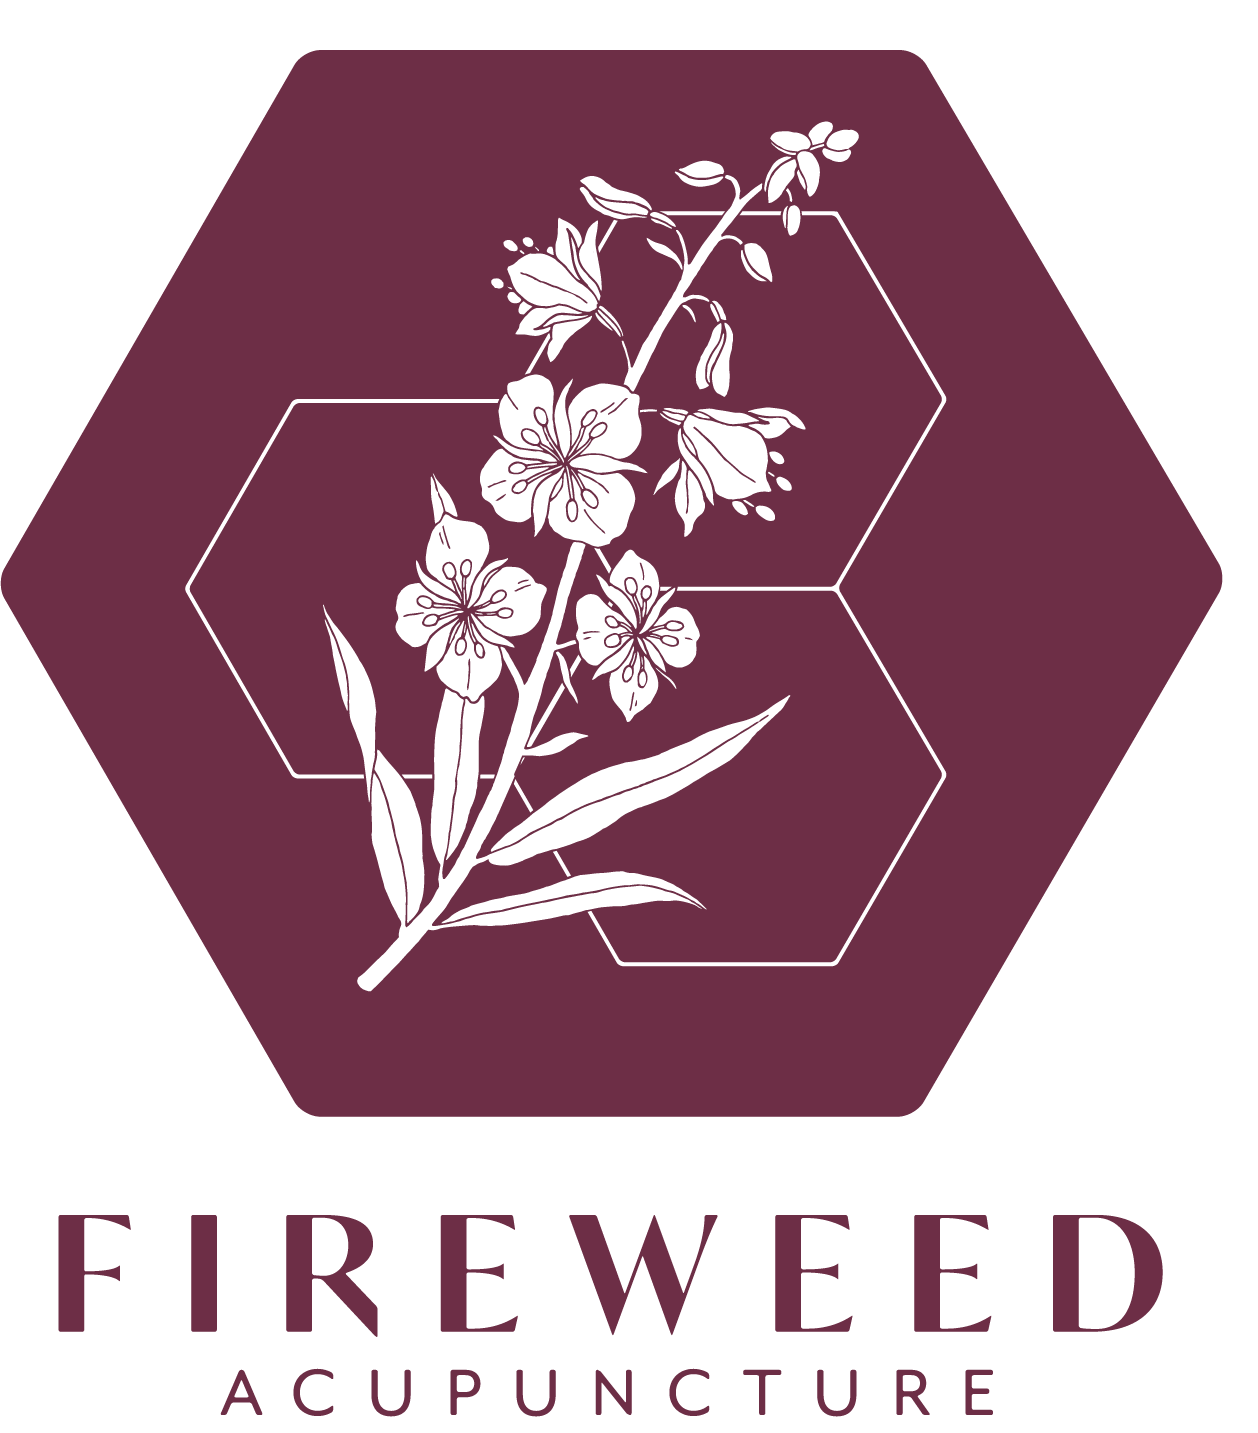 Fireweed Acupuncture